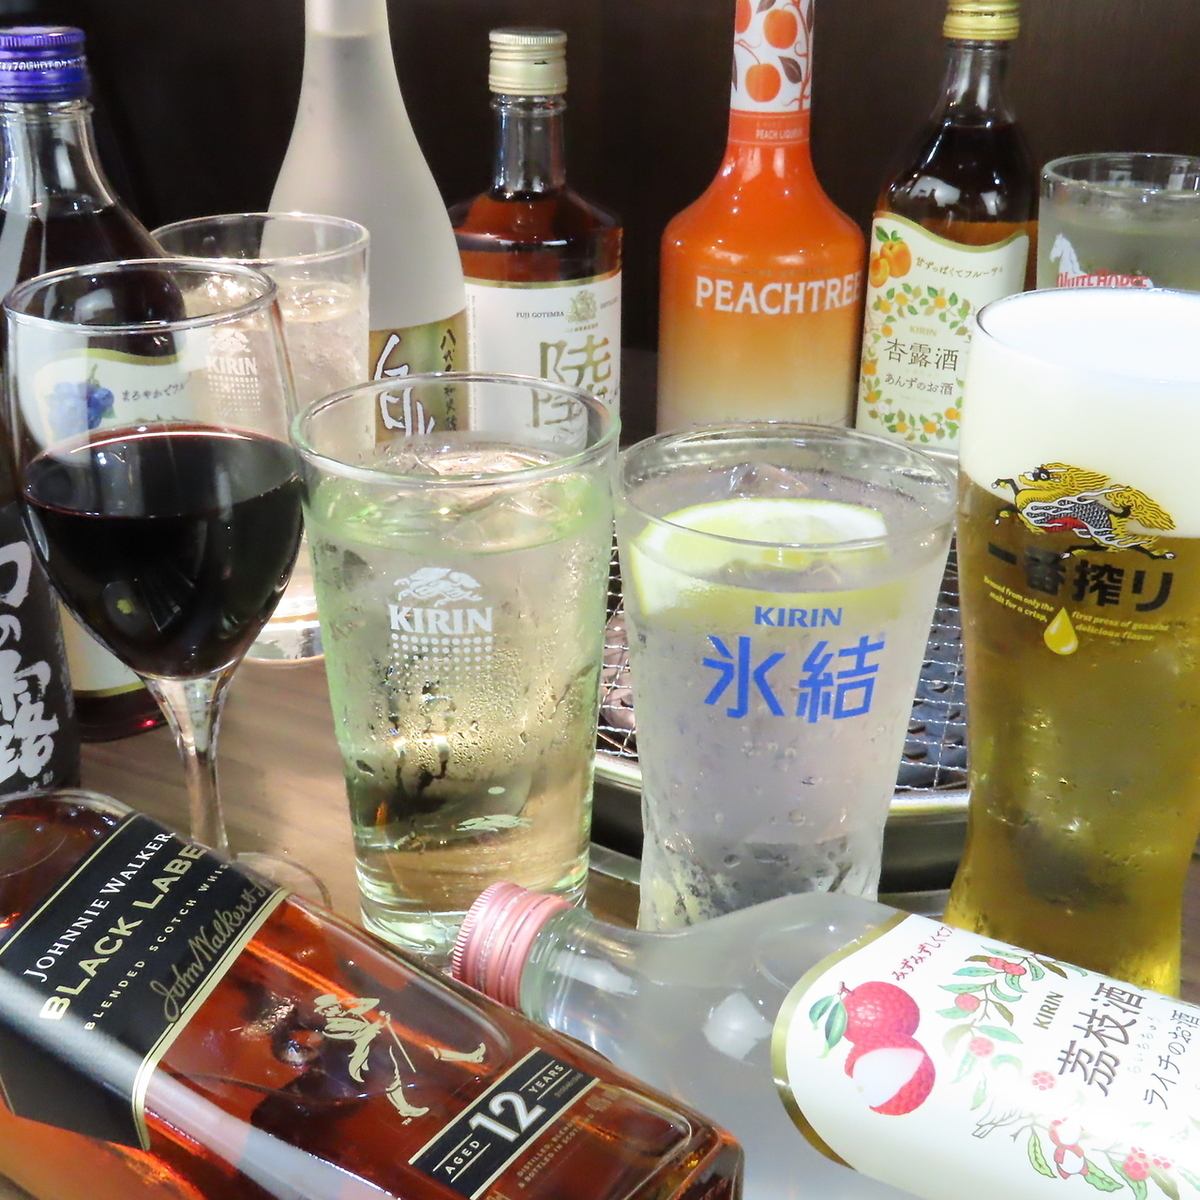 We also offer an all-you-can-drink course for those who want to drink a lot!